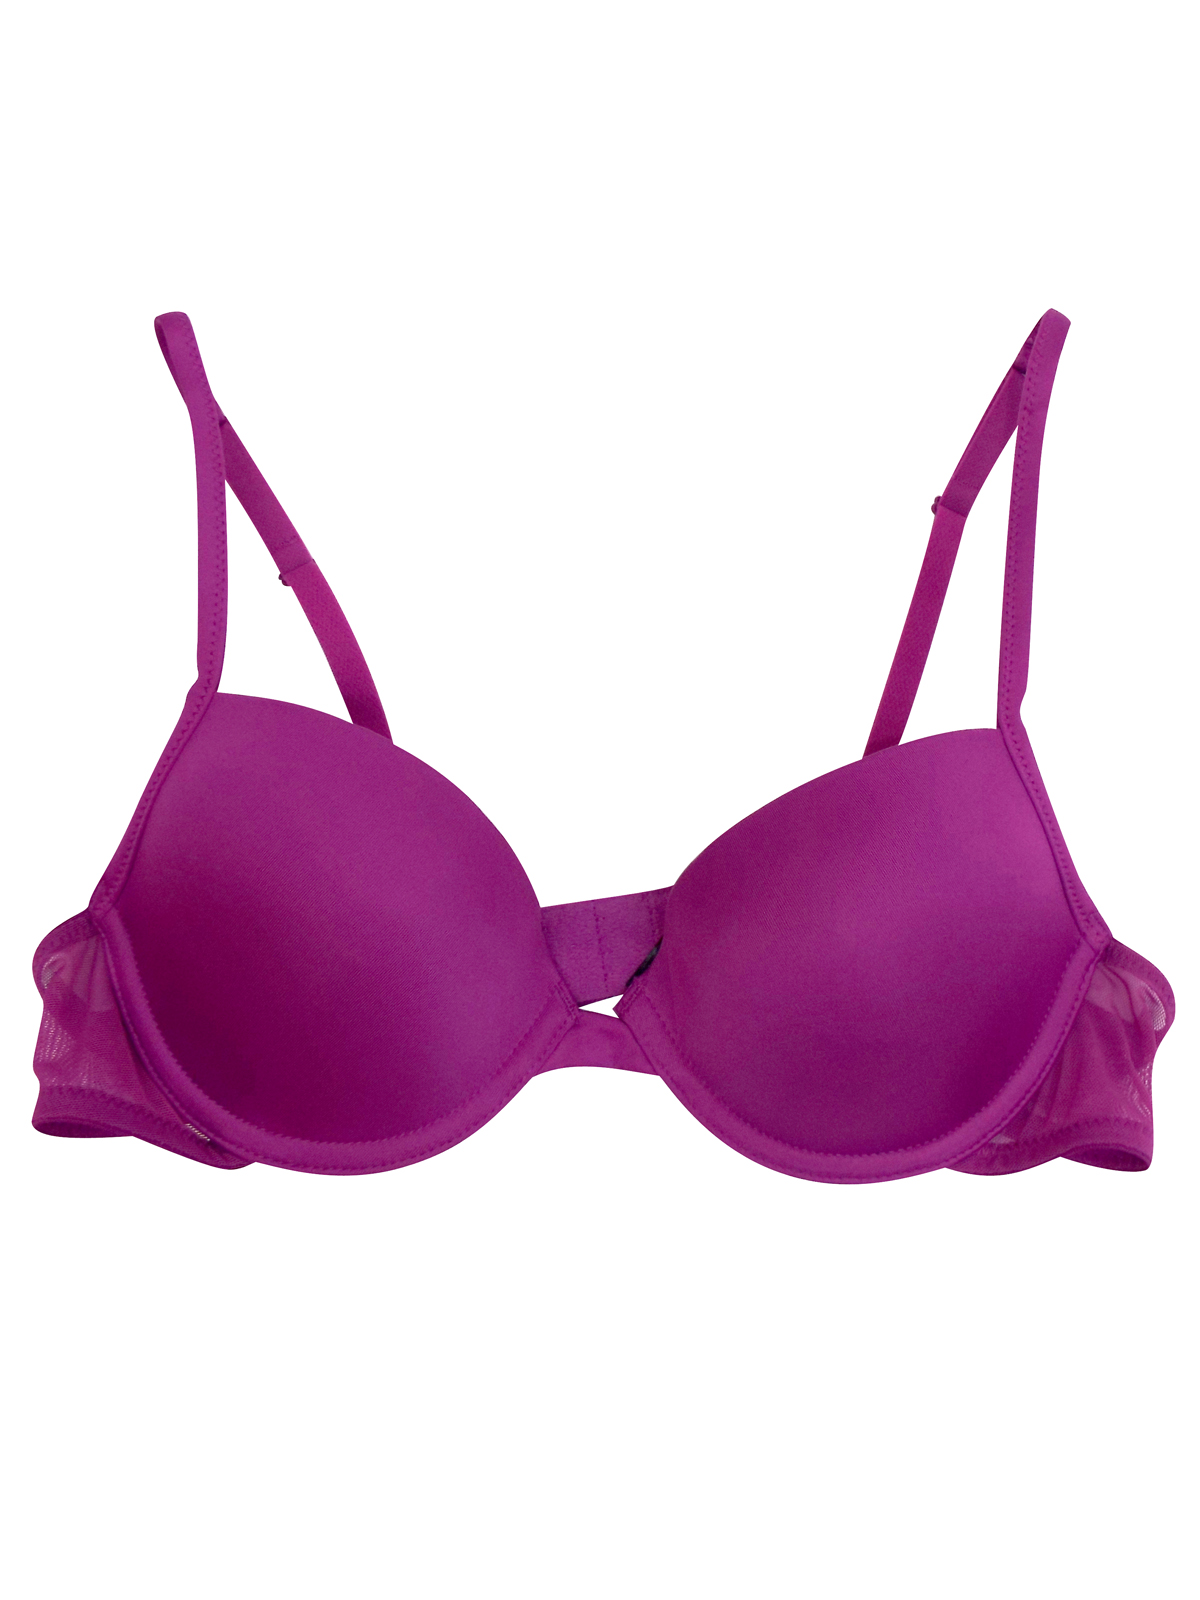 Marks and Spencer - - M&5 BRIGHT-VIOLET 2-Pack Underwired Padded Full ...